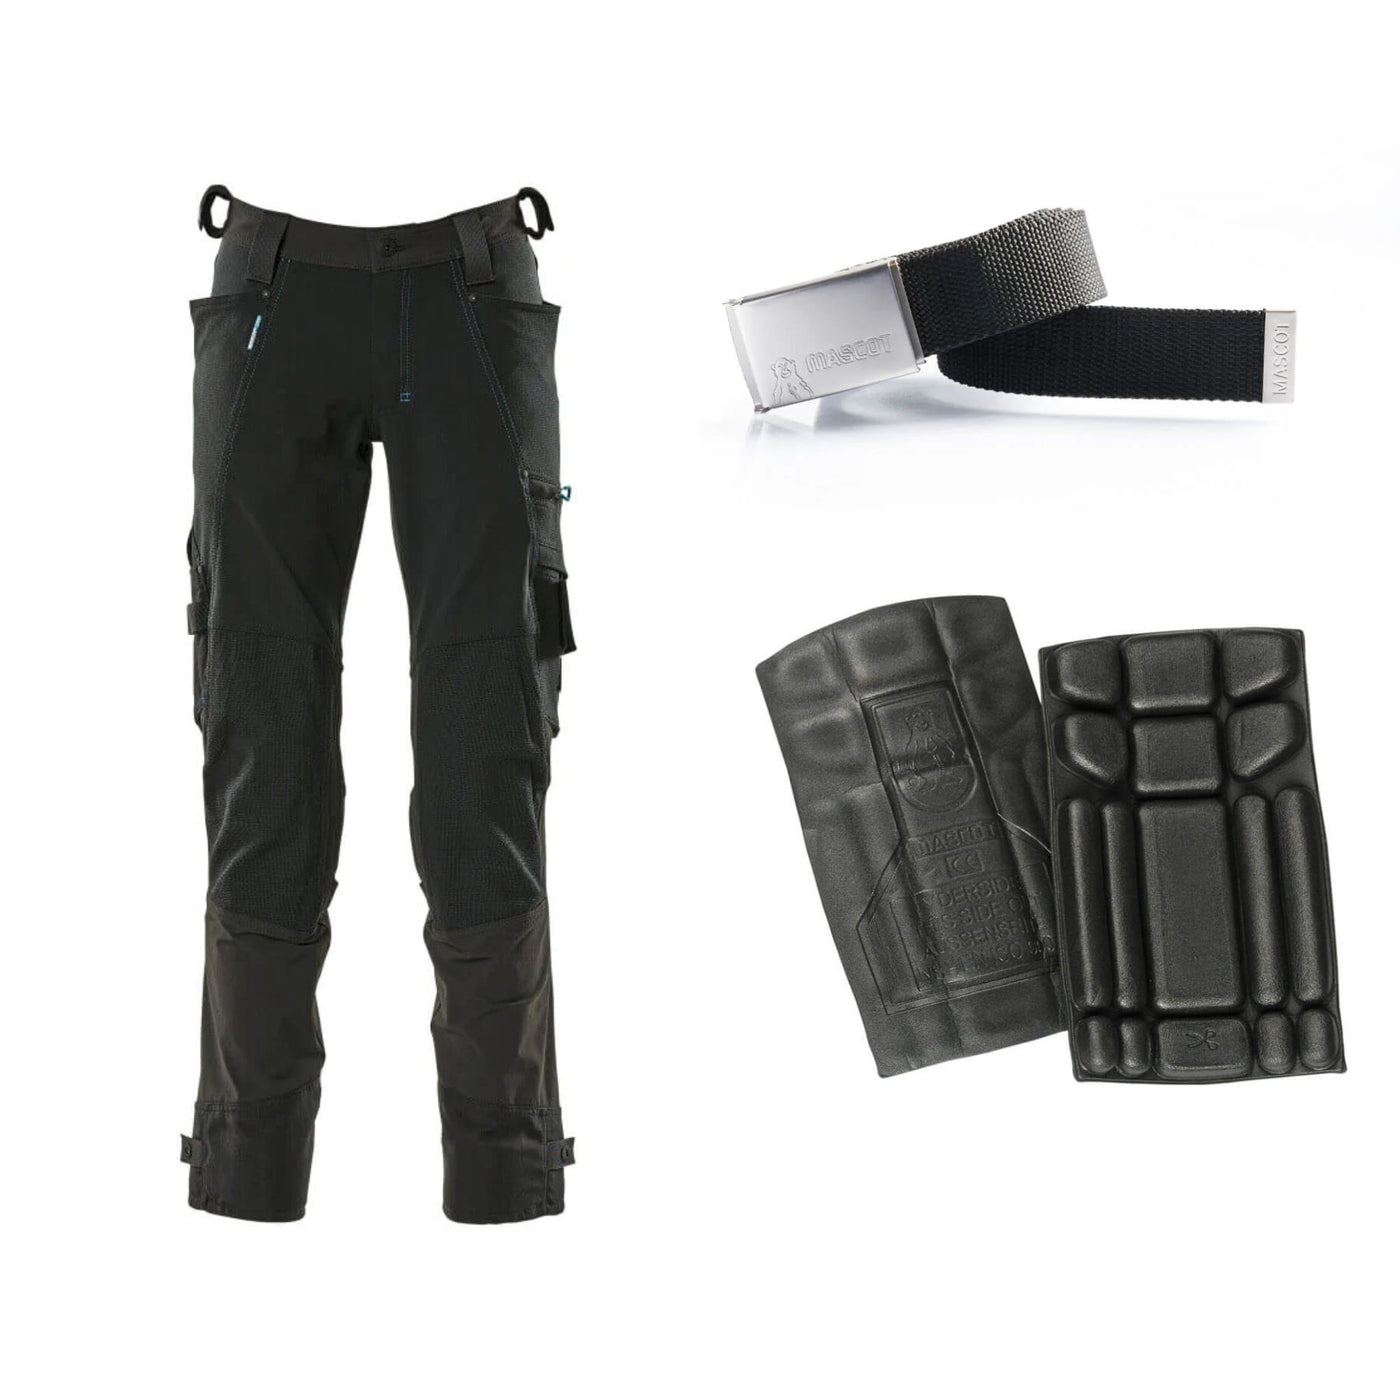 Mascot Special Offer 17079-311 Advanced Trousers Pack - Stretch Kneepad-Pocket Trousers + Belt + Knee Pads